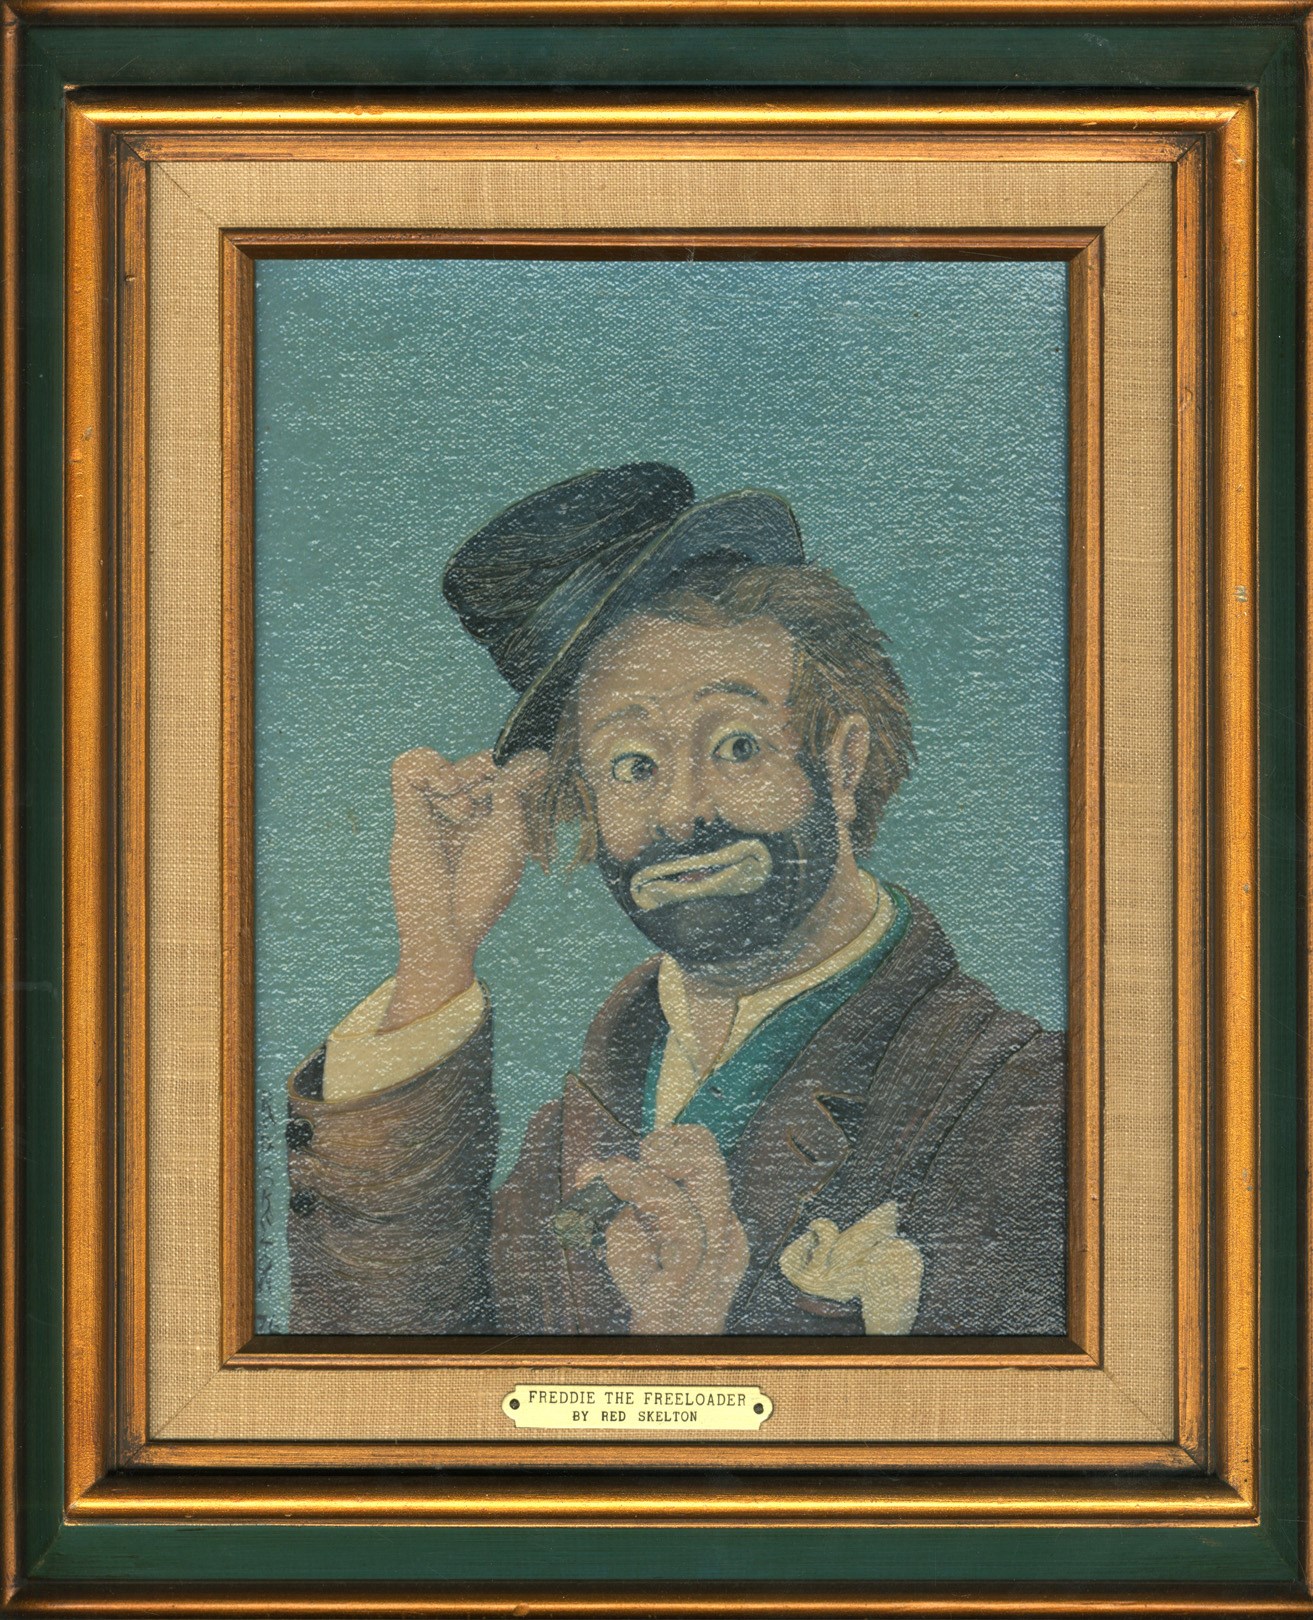 - "Freddie the Freeloader" Painting by Red Skelton, Gifted to Emmett Kelly